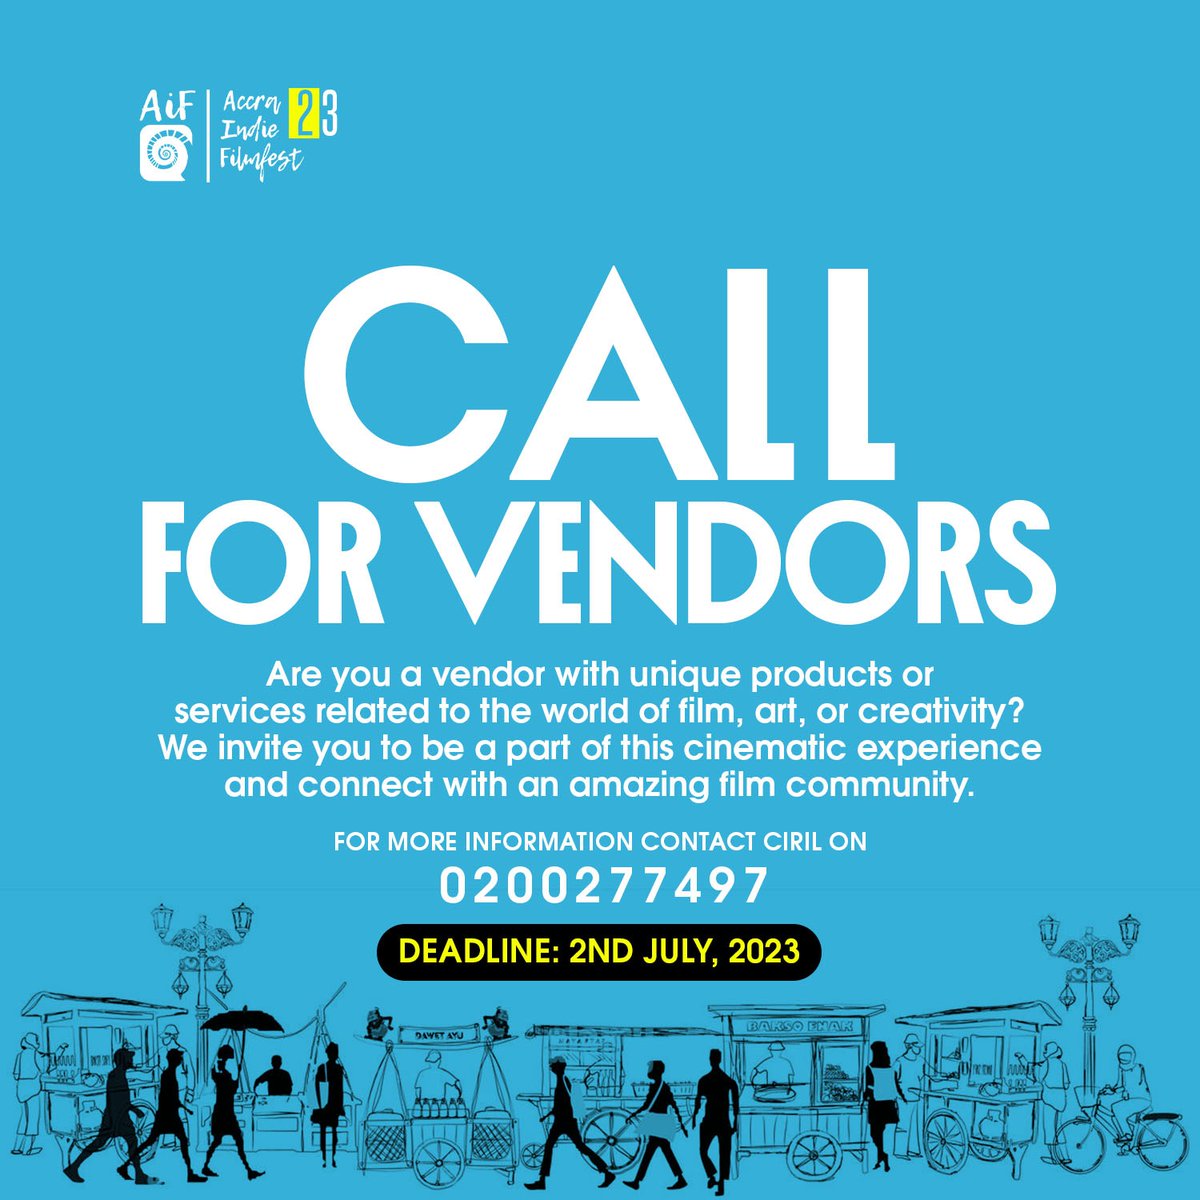 You have a product or service trailered towards filmmaking, music or arts in general?

Here is an opportunity to connect with a unique creative community.

Apply NOW by calling the number.

#AiF23 #indie #film #festival #international #short